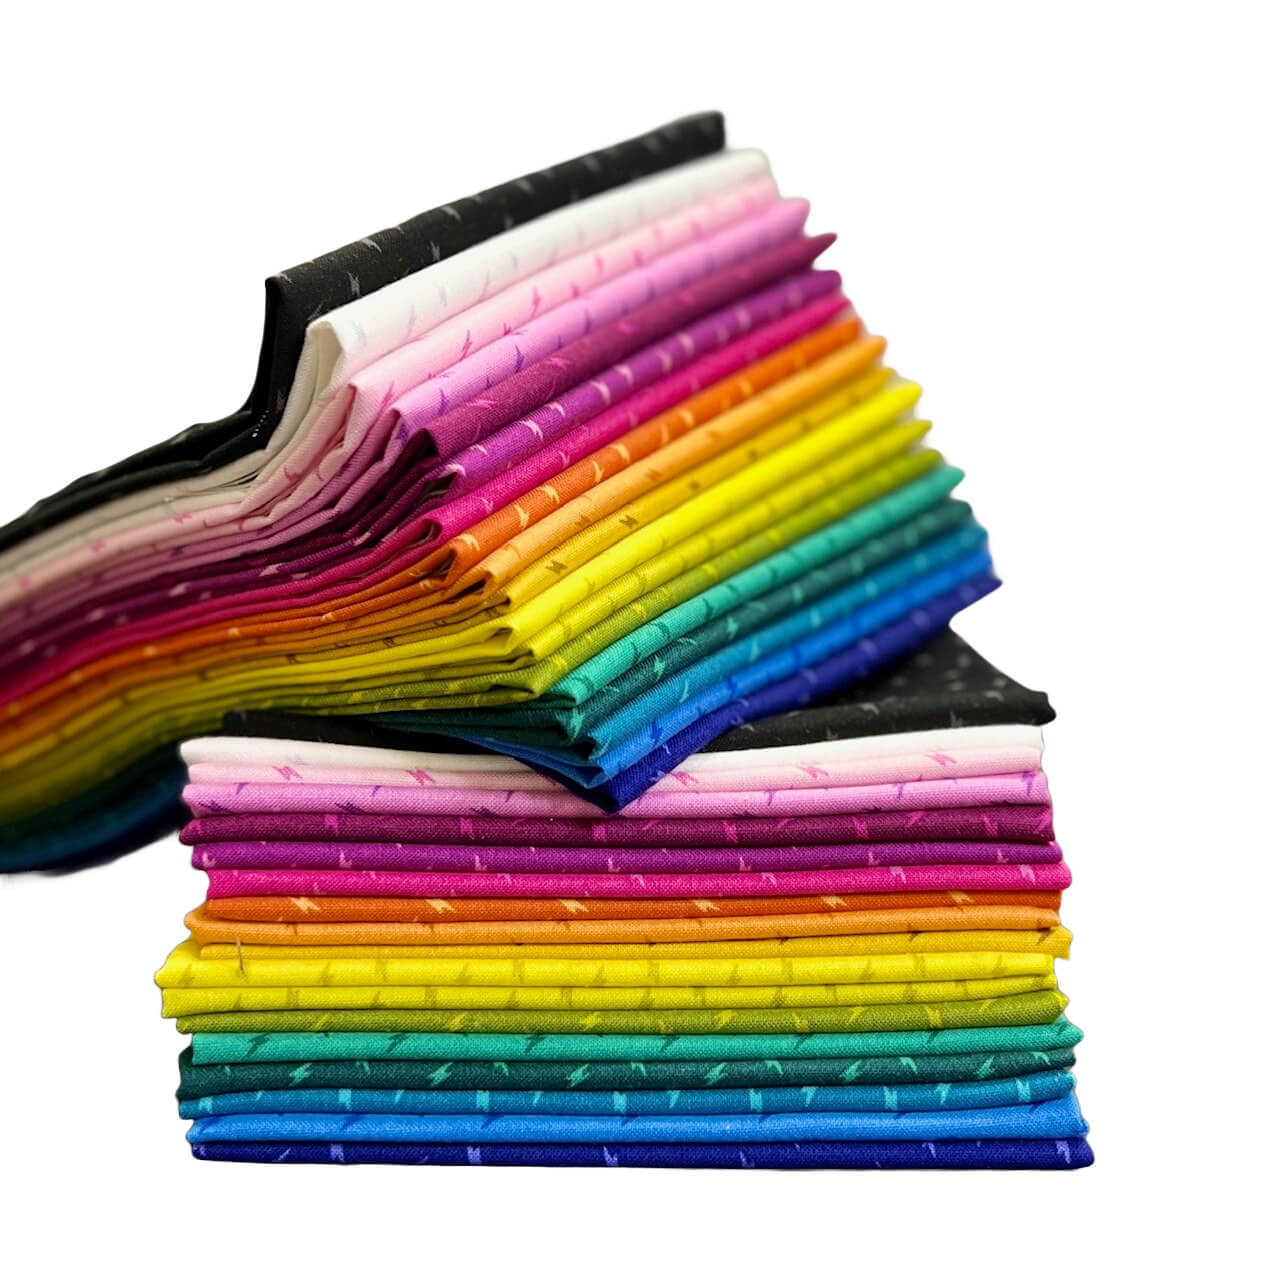 The image shows a collection of stacked fabric fat quarters from the Atomic collection.